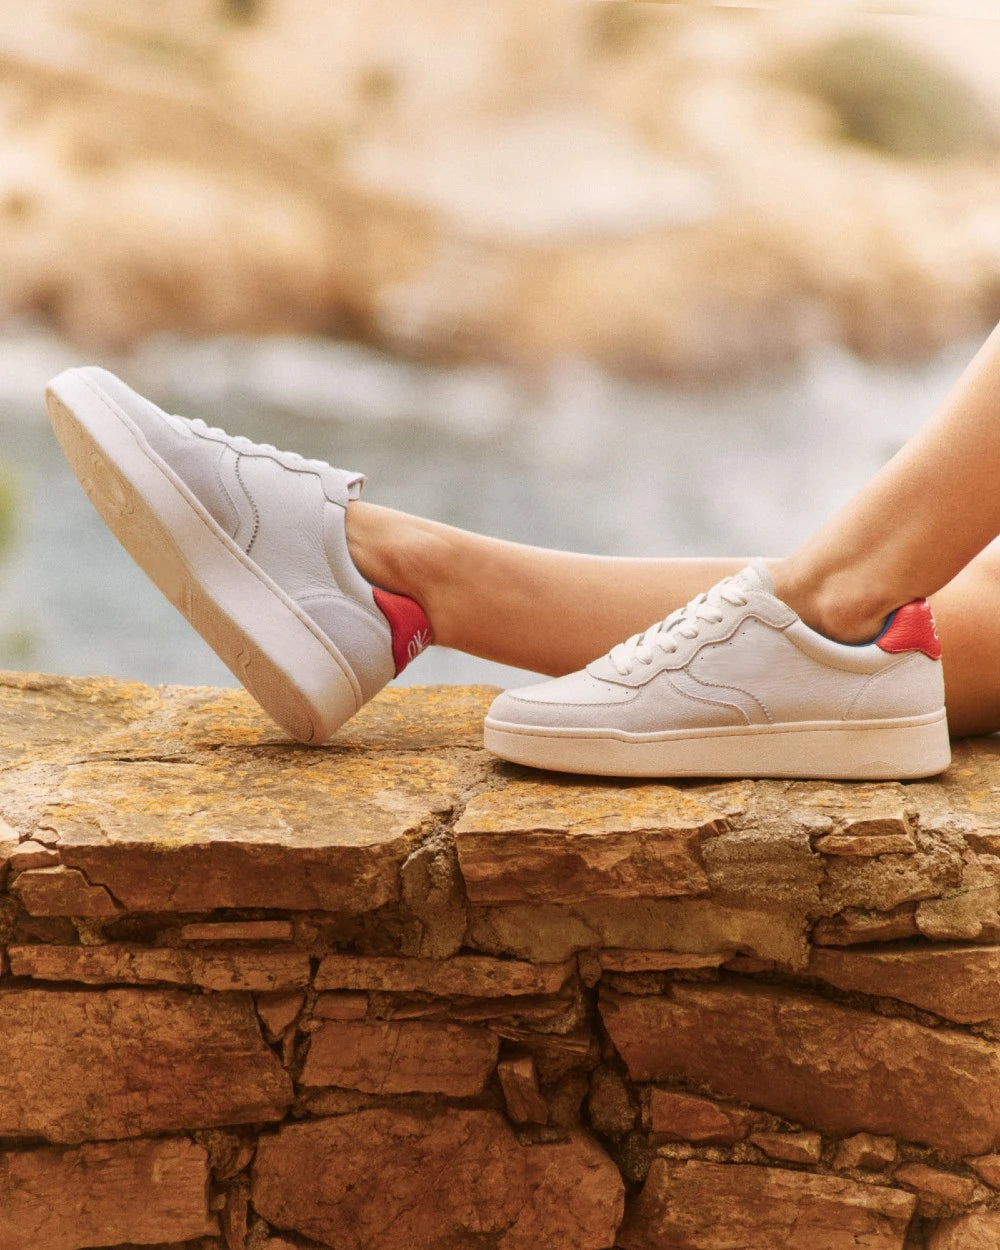 Soludos - The Official Home of Soludos Espadrilles and Sneakers